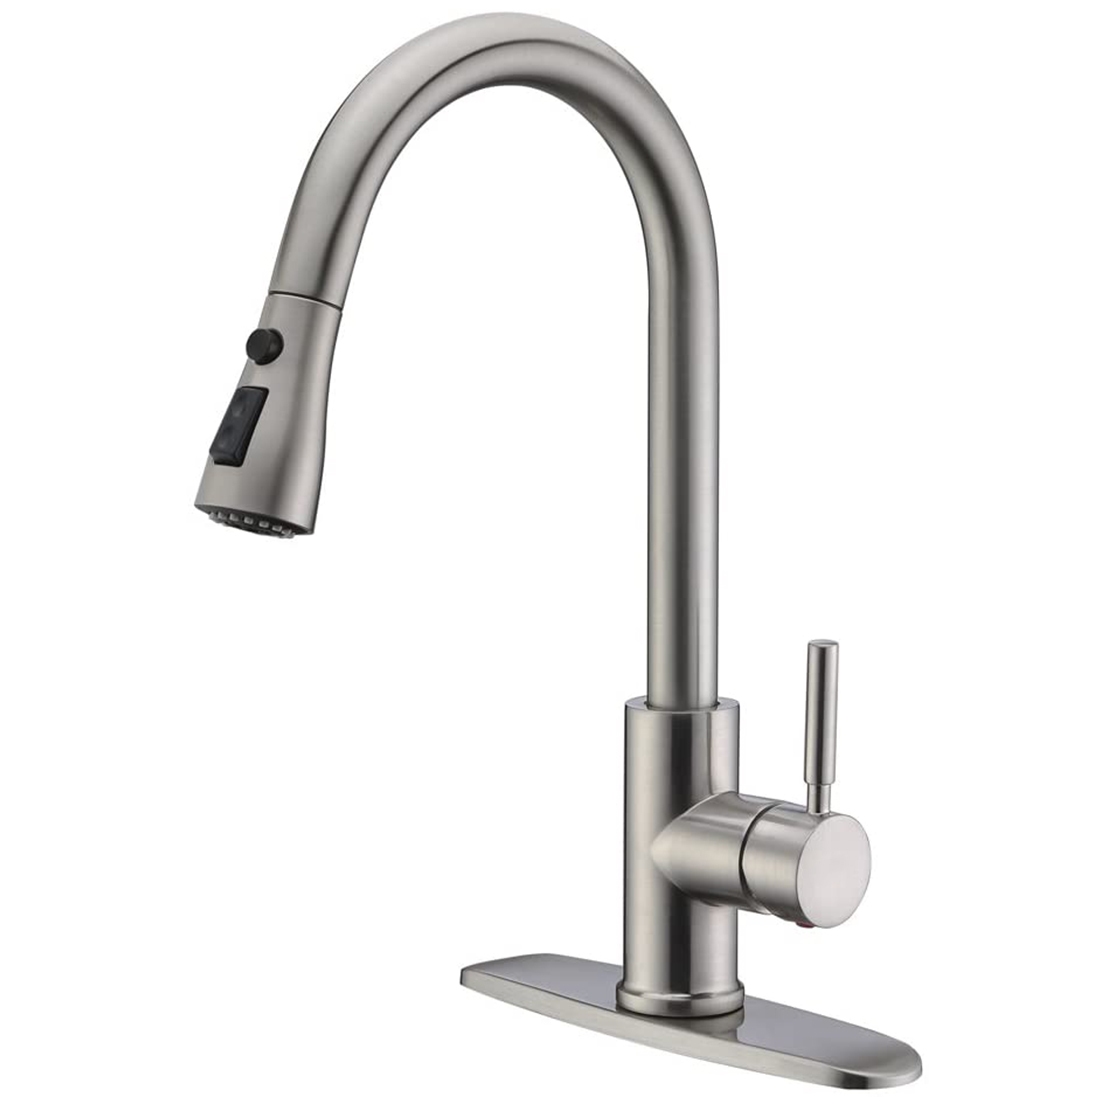 1 WEWE Single Handle High Arc Brushed Nickel Pull Out Kitchen FaucetSingle Level Stainless Steel Kitchen Sink Faucets With Pull Down Sprayer 7 